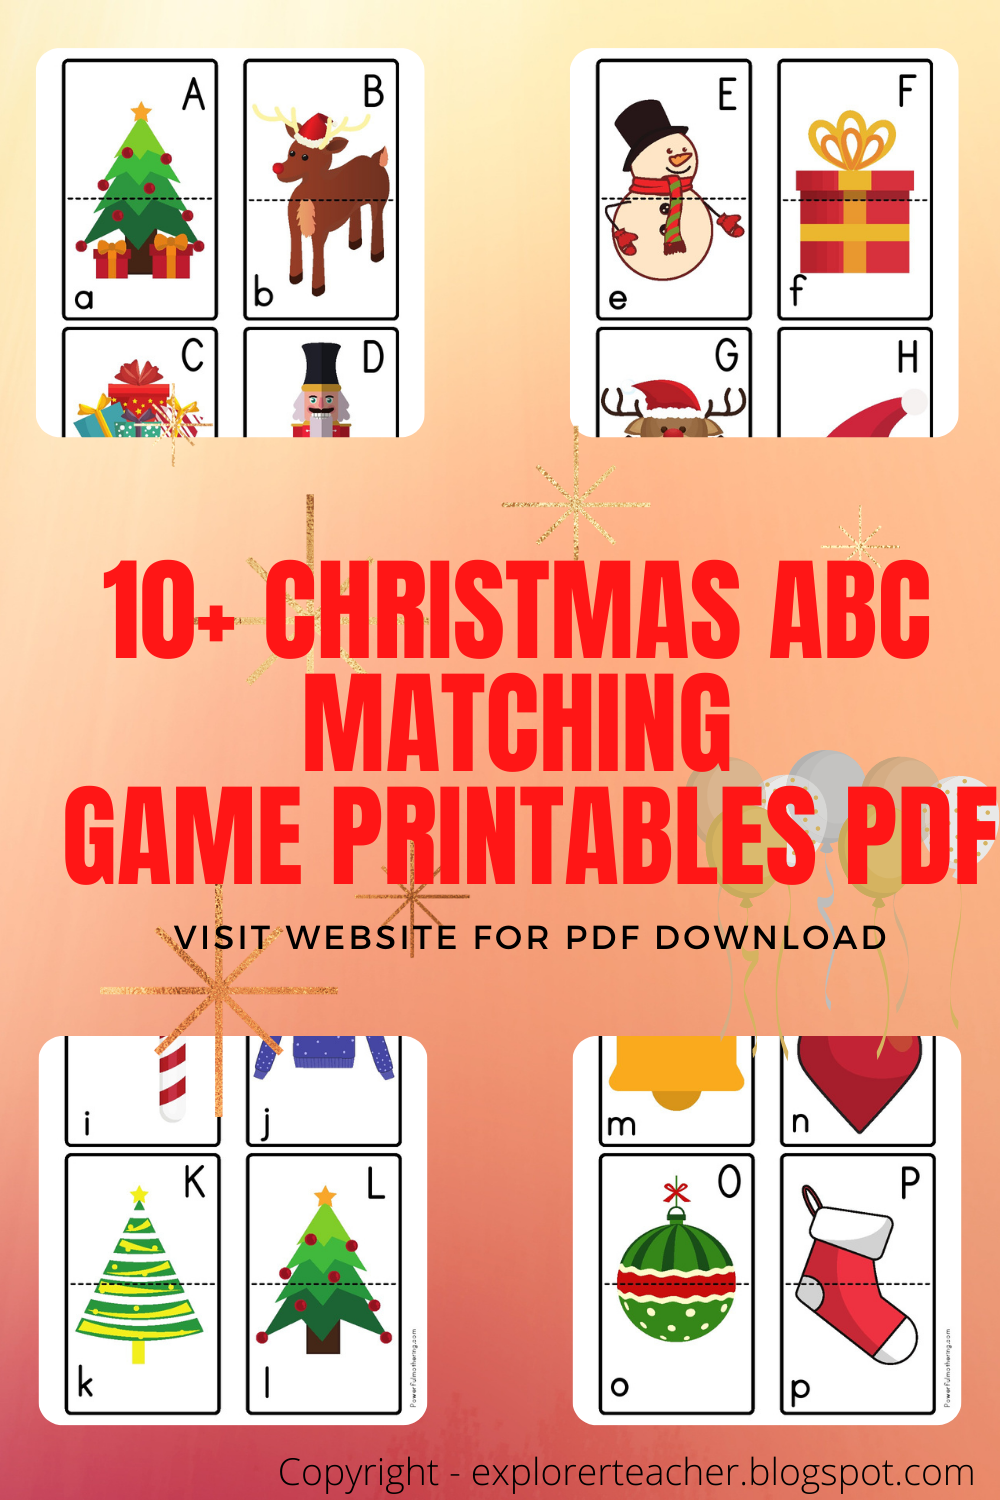 christmas-abc-matching-game-printables-for-kids-and-pdf-download